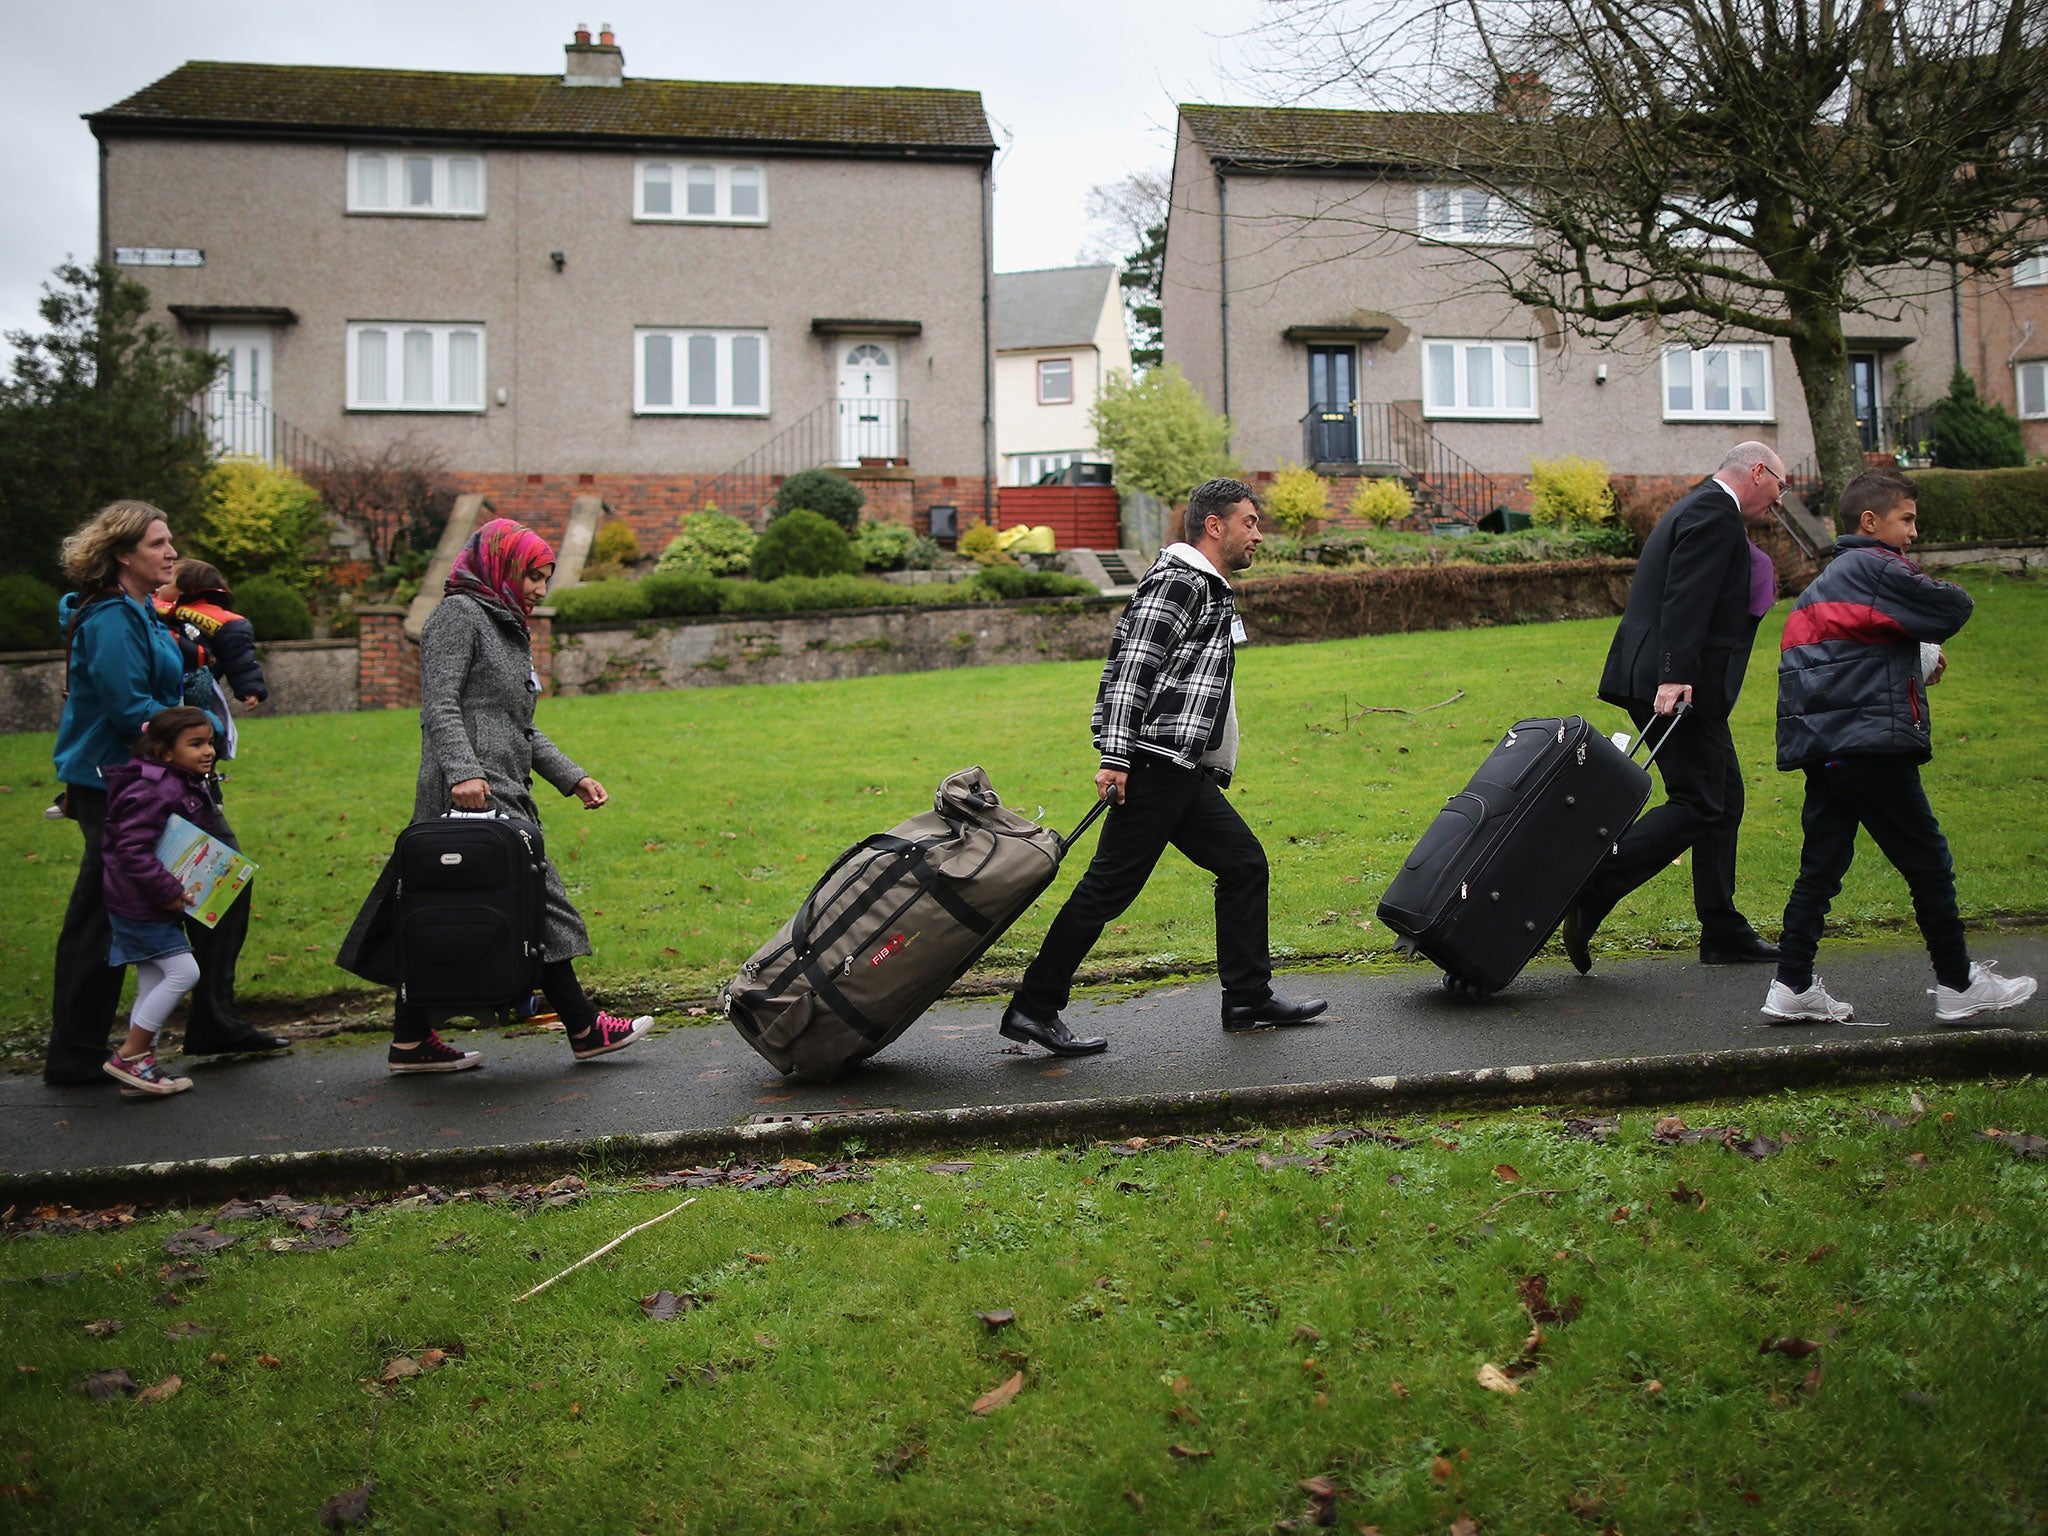 Syrian refugee families arrive at their new homes on the Isle of Bute on December 4, 2015 in Rothesay, Isle of Bute, Scotland.